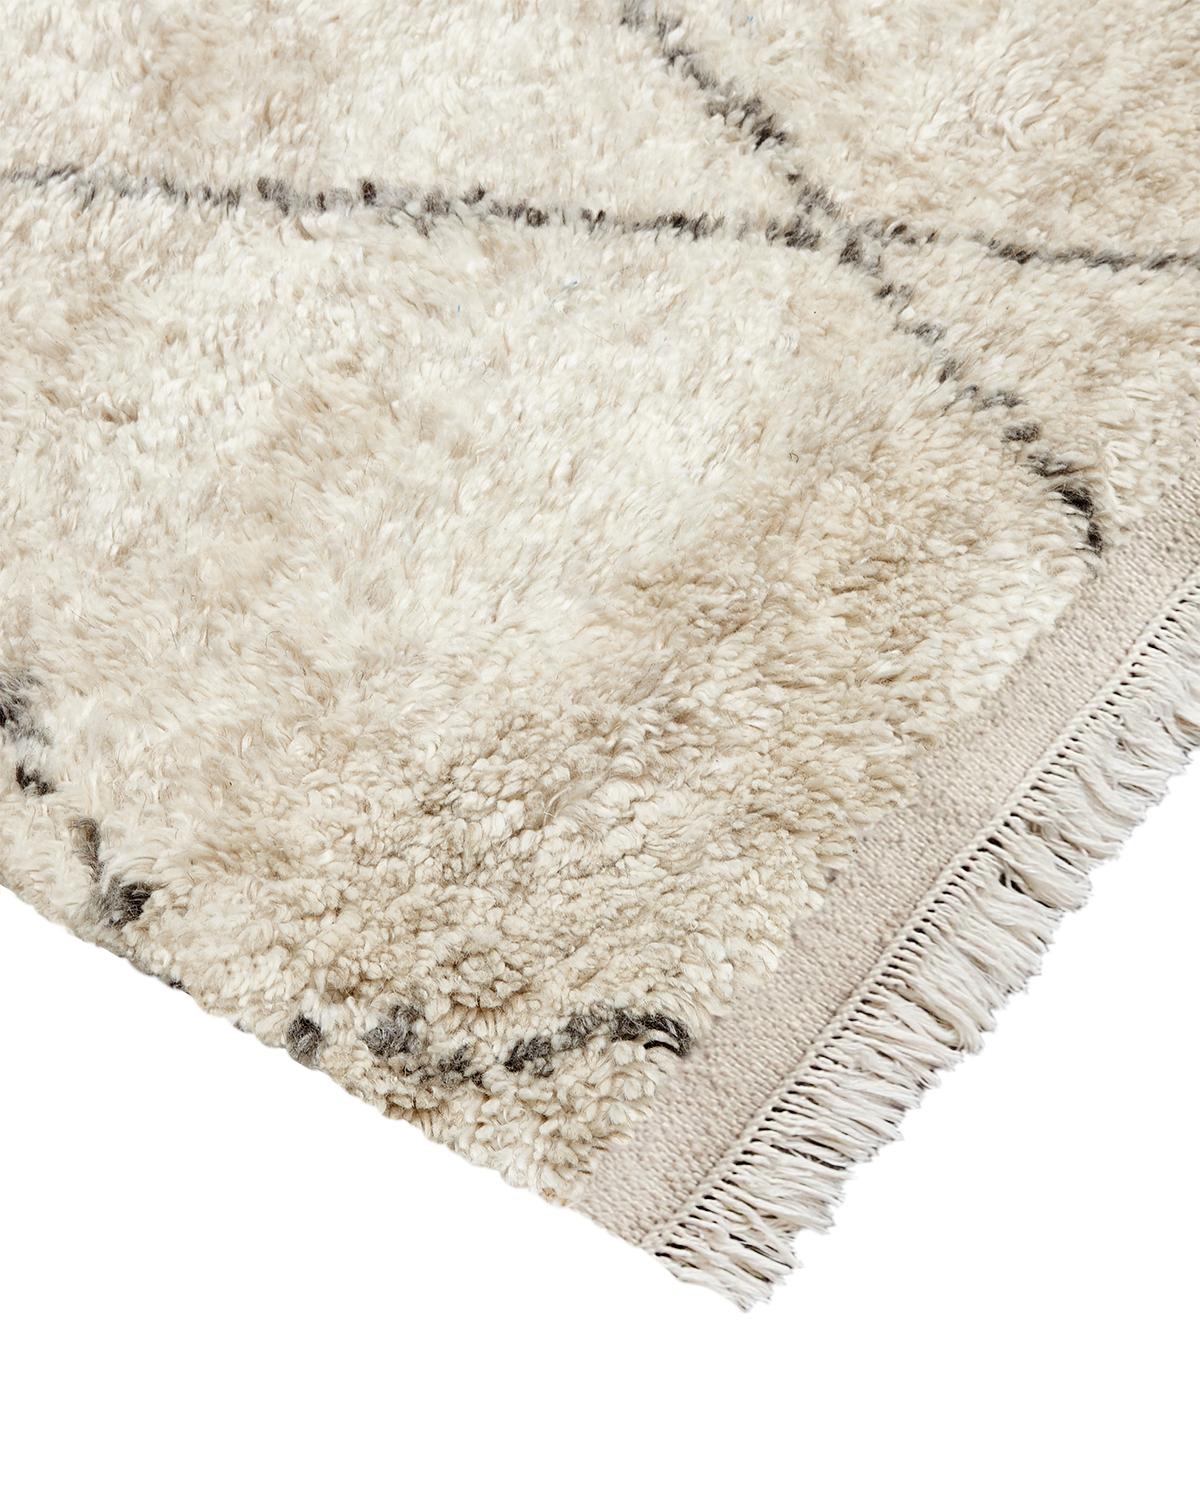 Moroccan rugs such as Beni Ourains and boucherouites are highly prized for their plush pile that makes walking barefoot a delight. hand knotted of sumptuous wool with designs inspired by centuries-old Tribal motifs, the Shaggy Moroccan collection